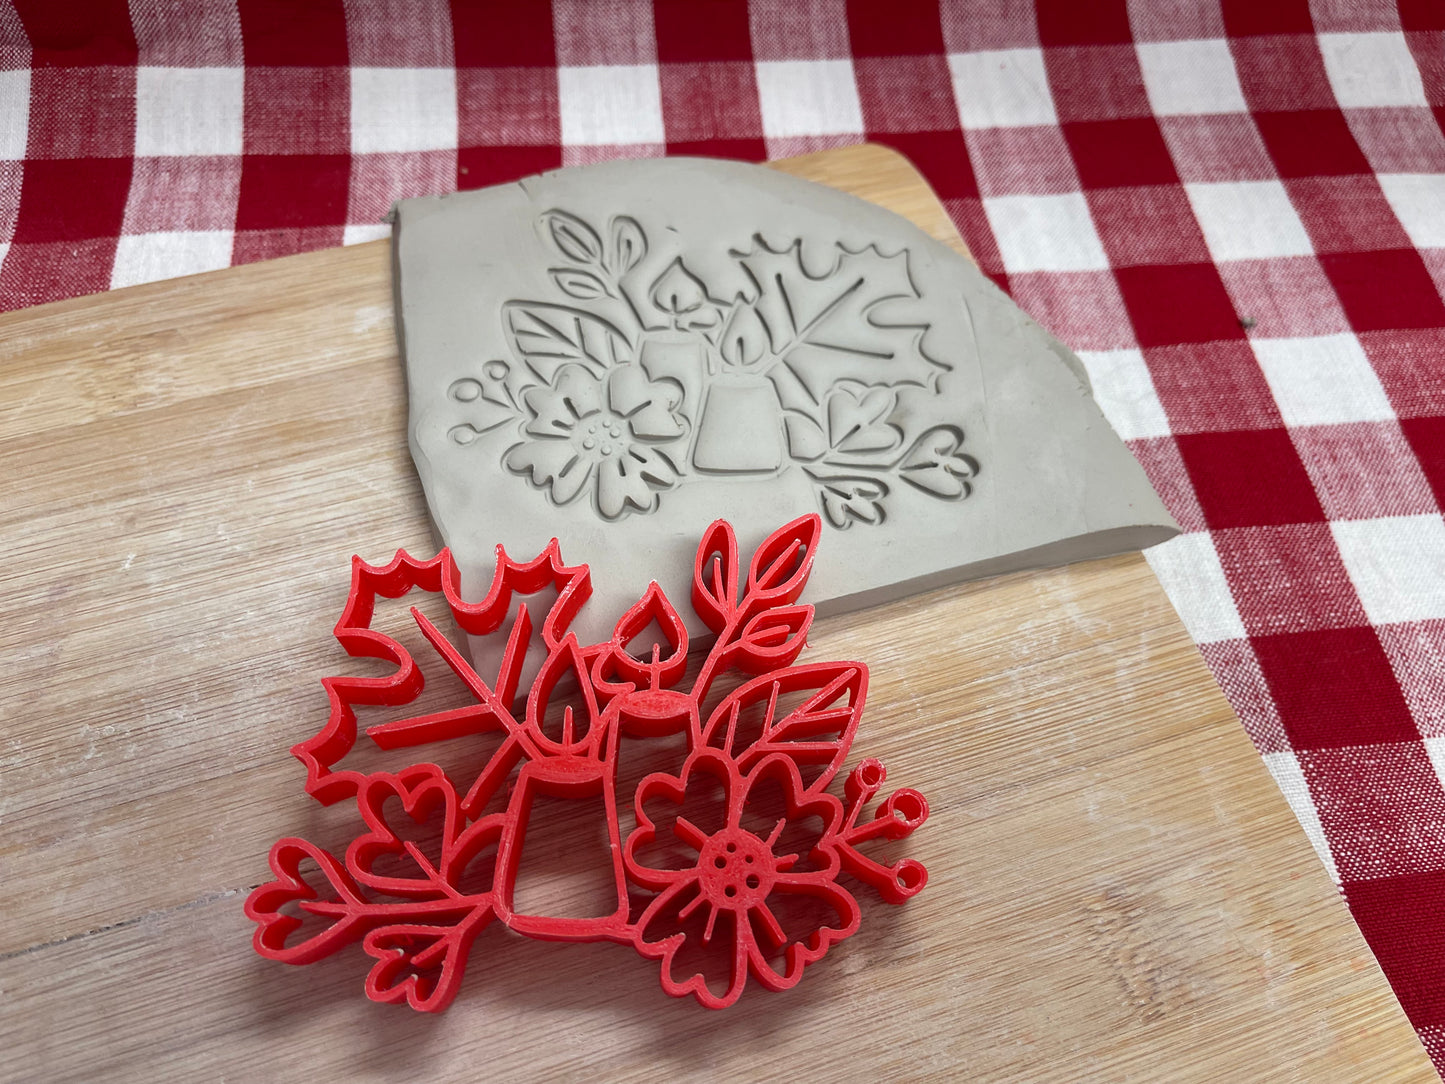 Autumn Stamp Series - Autumn Candle Stamp, plastic 3D printed, multiple sizes